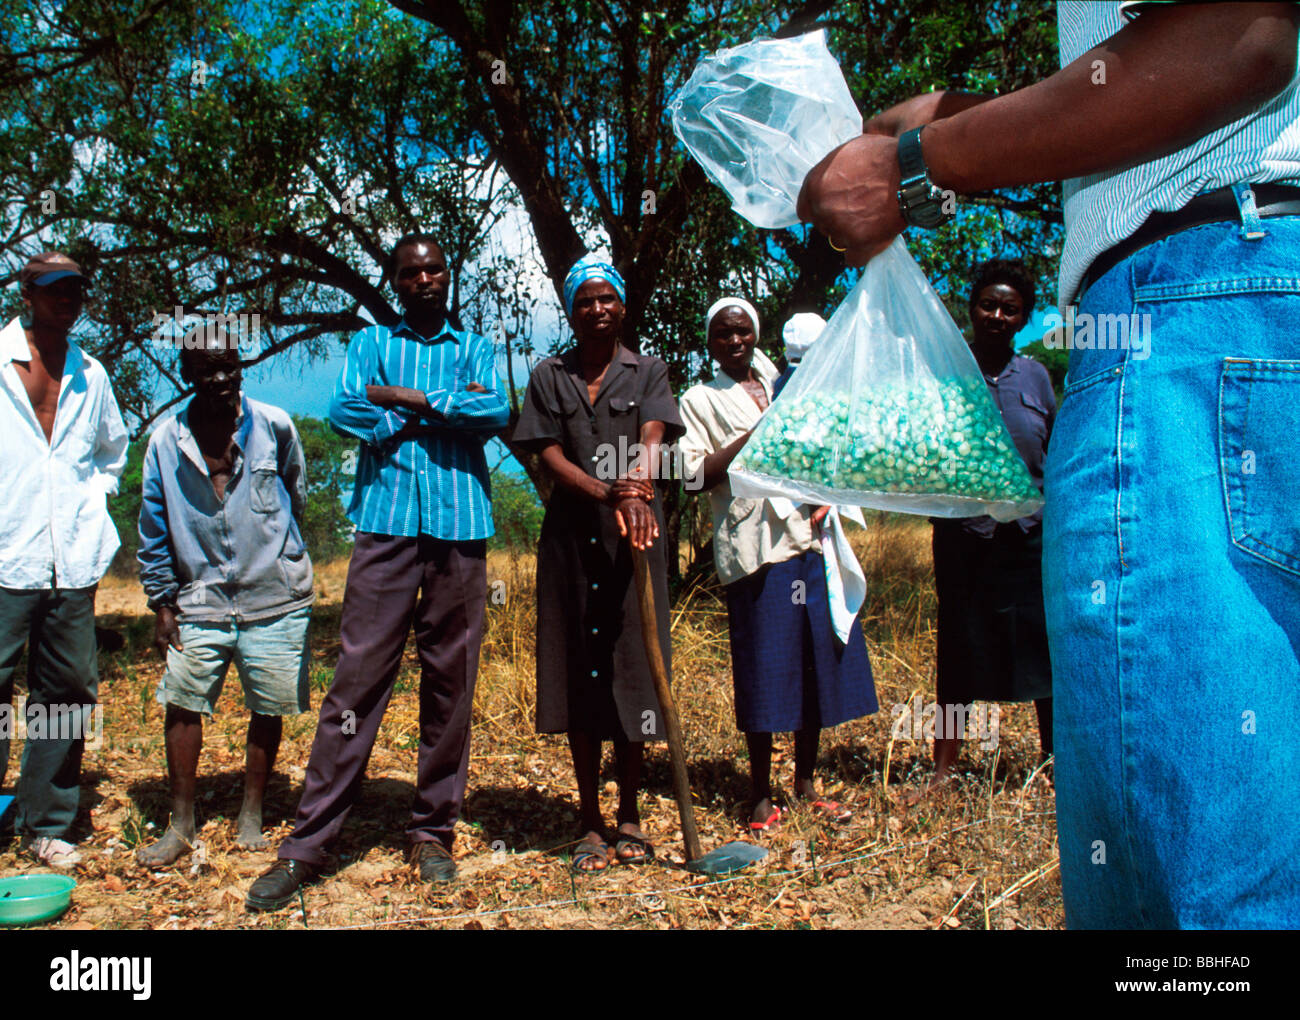 Claytus Damba holds a bag of fertilizer as he lectures members of a rural community in Ruwa outside Harare Zimbabwe in Stock Photo